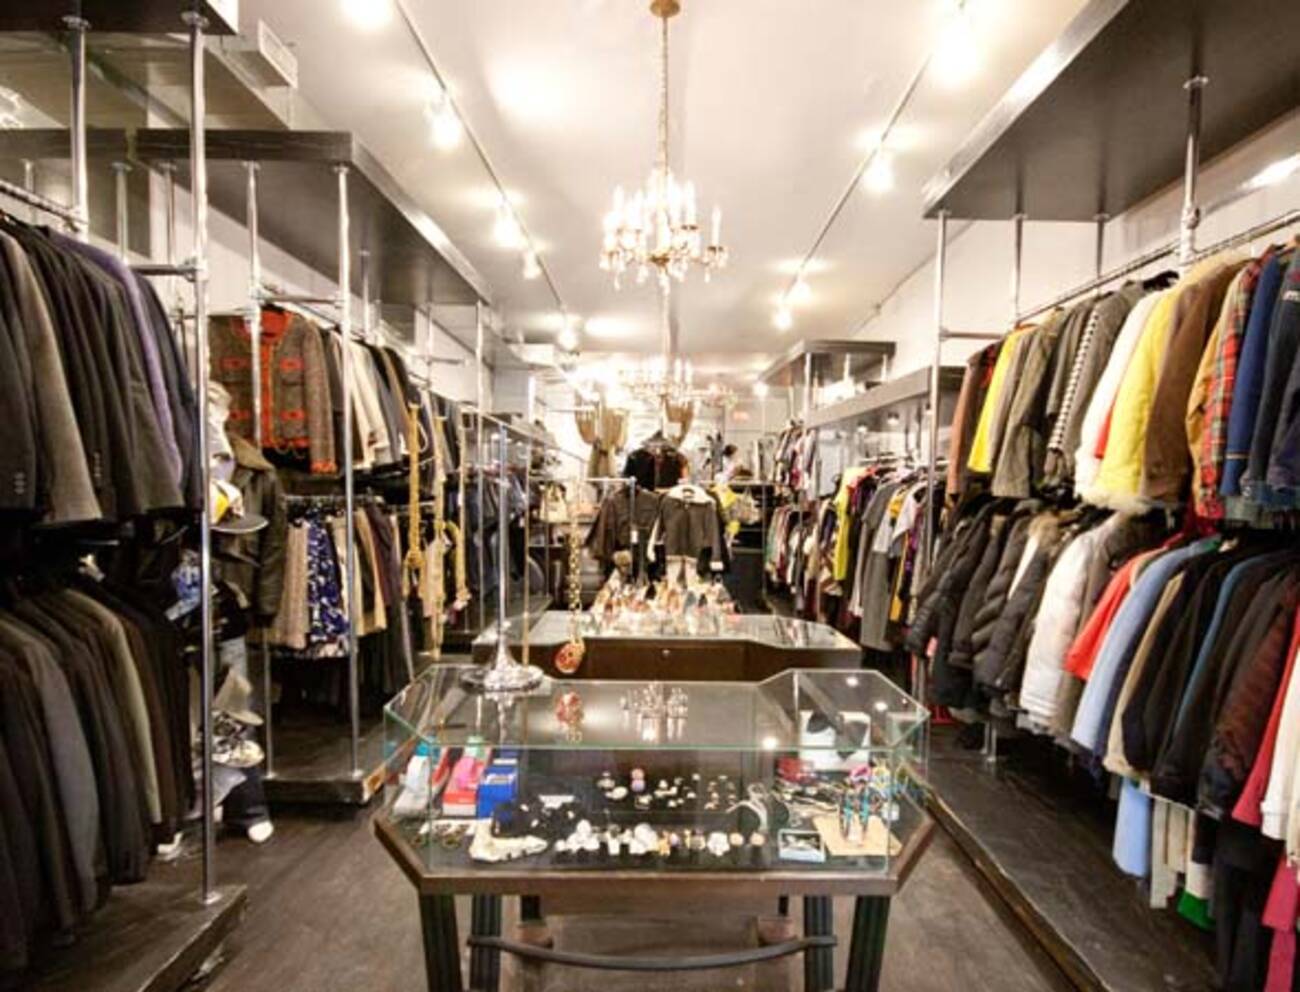 Designer consignment boutique a hit on Queen West